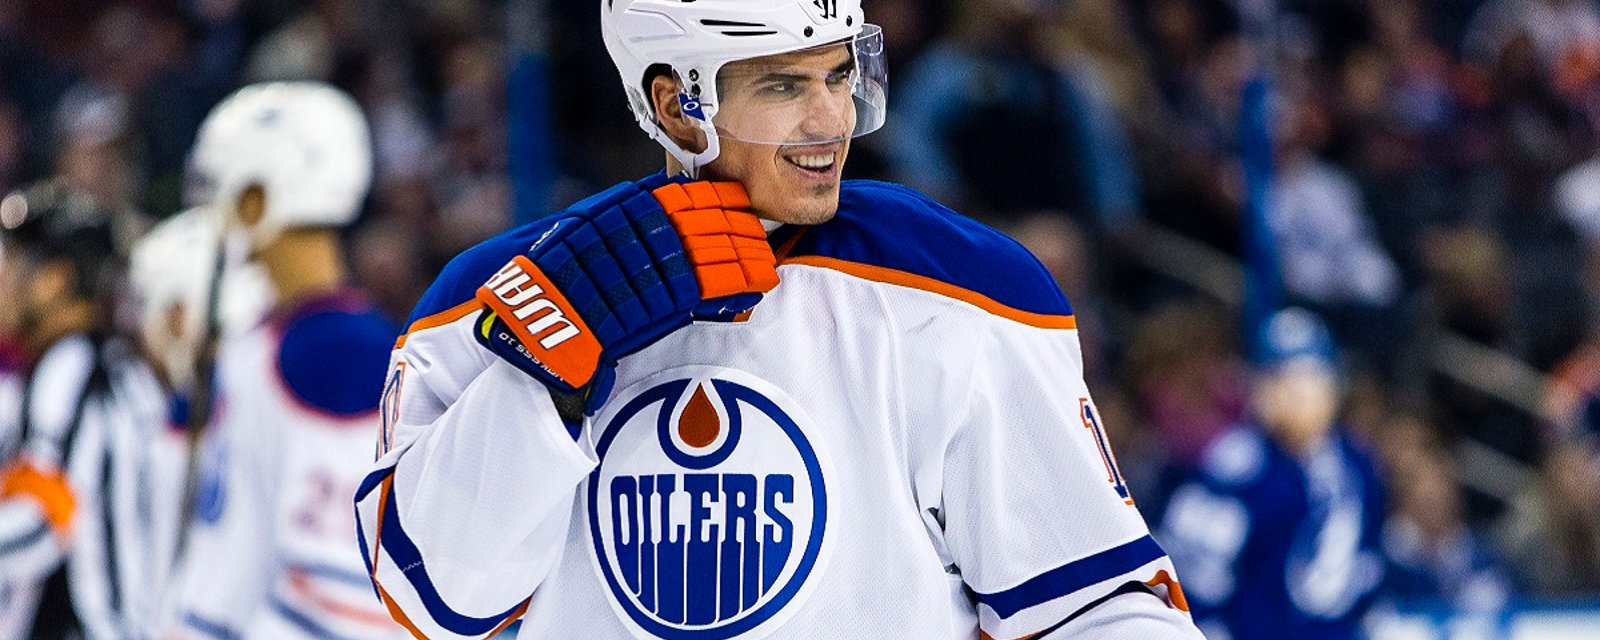 Breaking: Yakupov appears to take a shot at the Oilers on his way out.